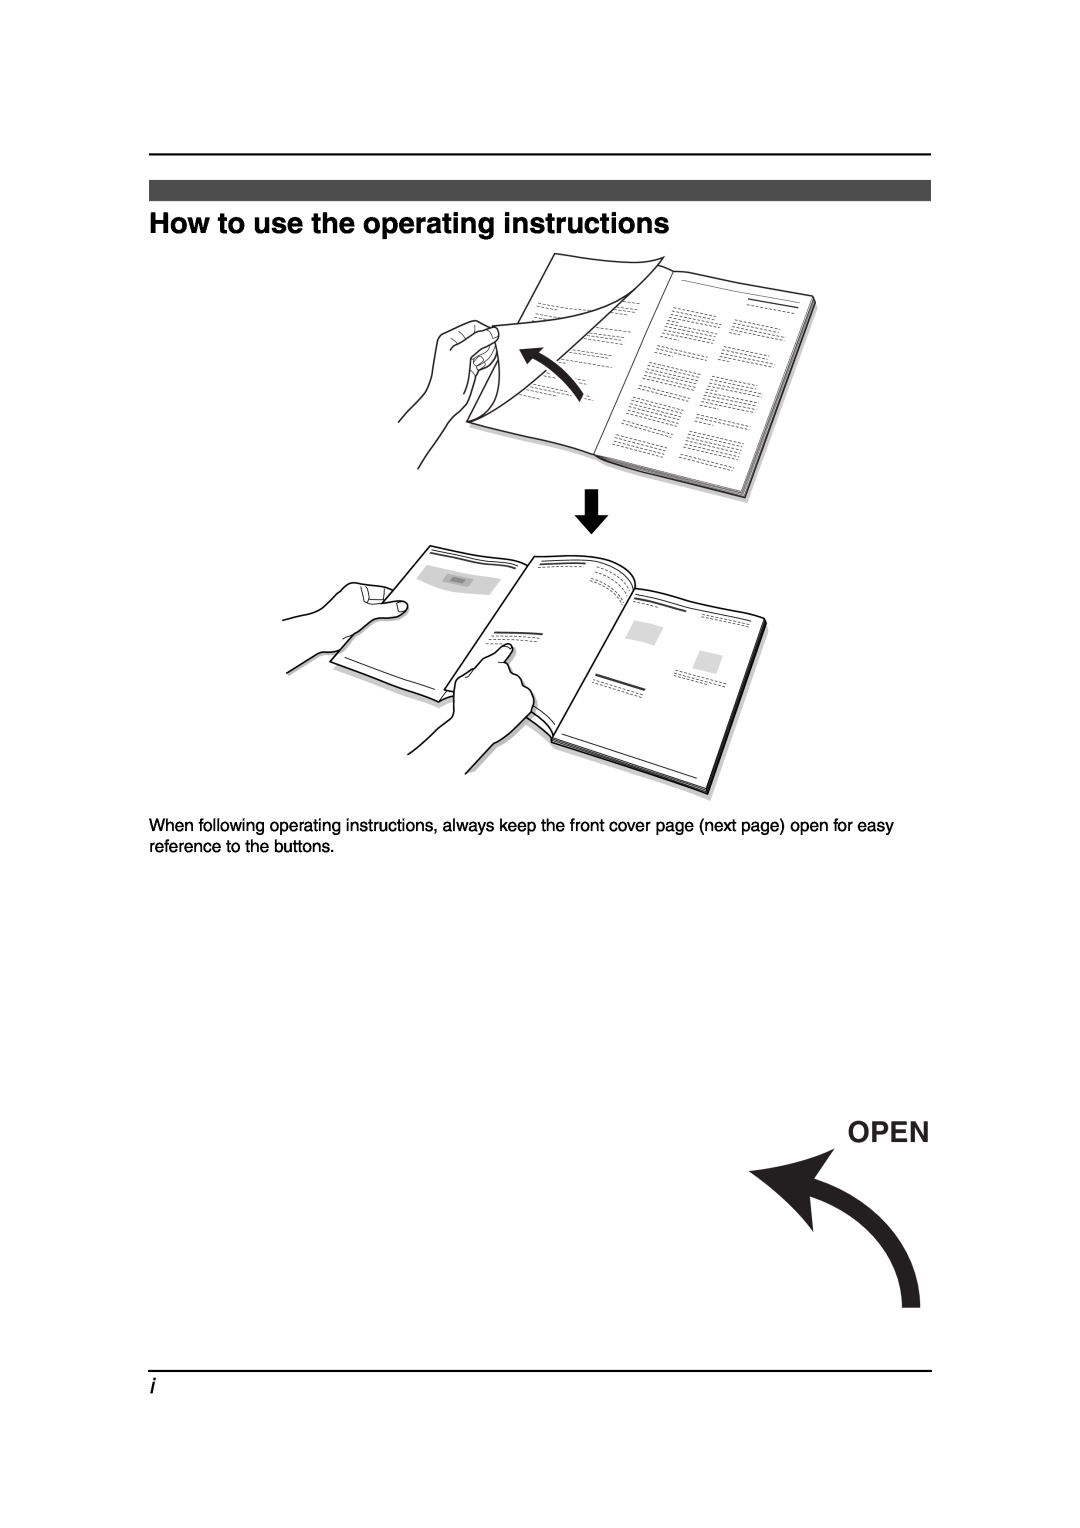 Panasonic KX-FLB851 manual How to use the operating instructions, Open 